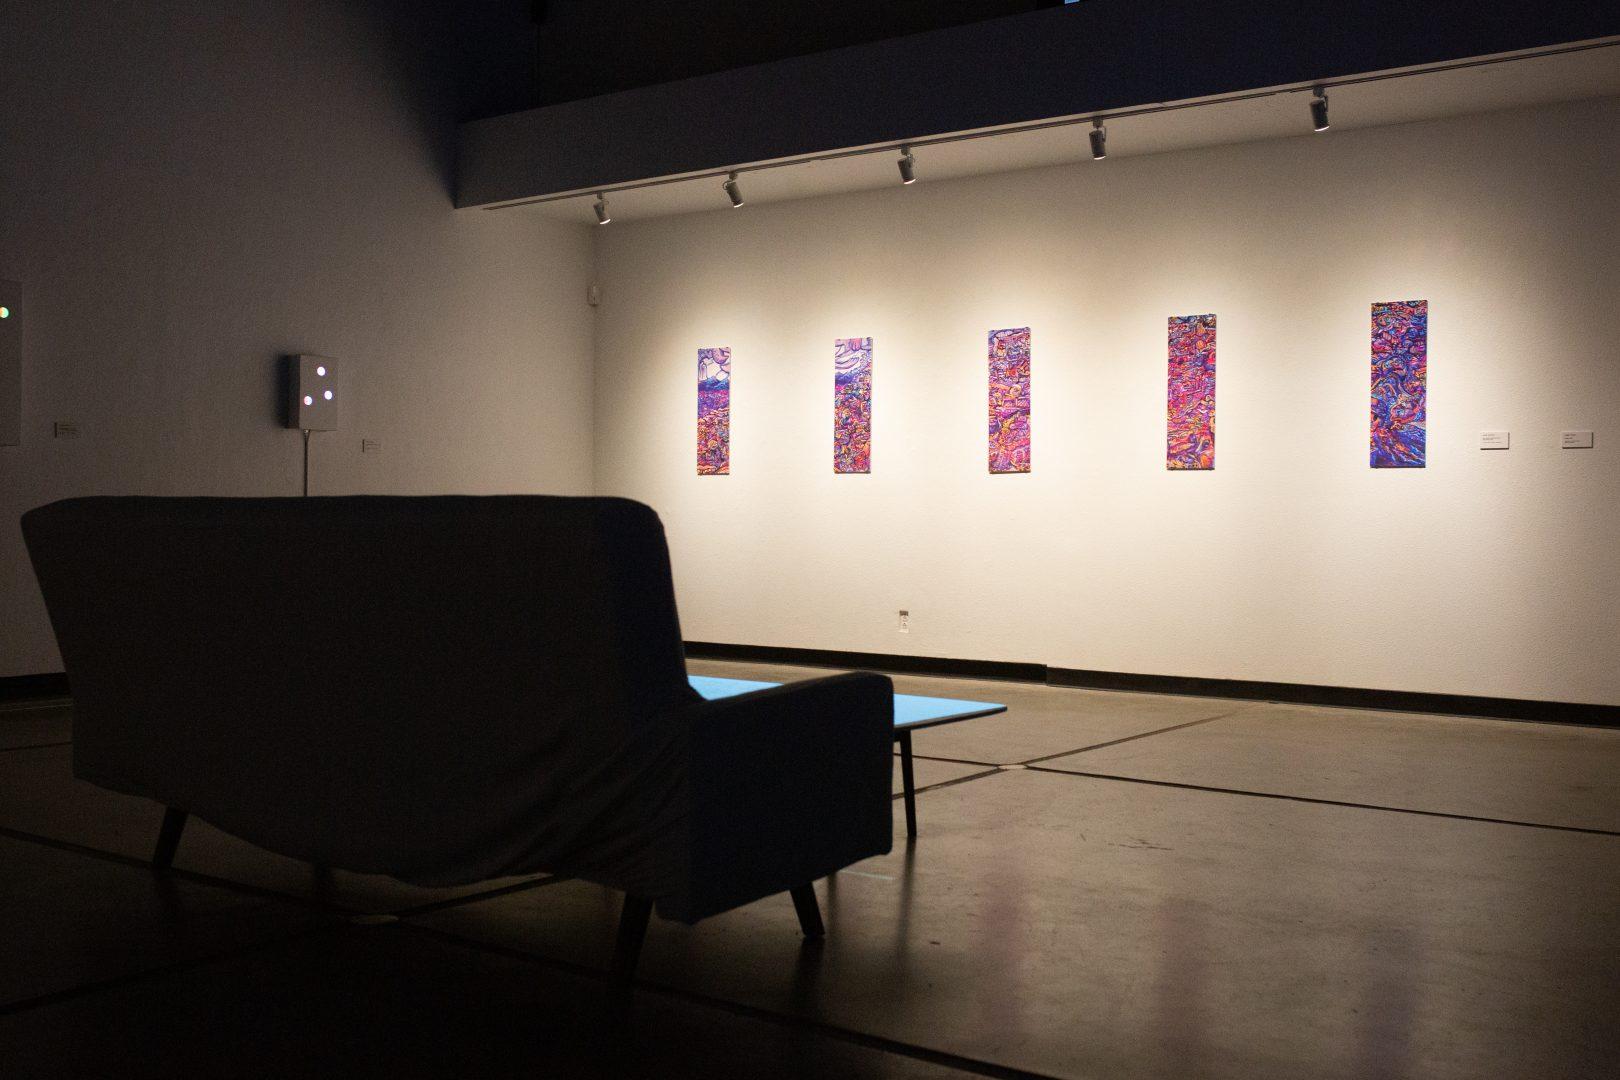 The Perspectrum Exhibit currently displayed at Phebe Conley Art Gallery, show casing A Human Eye Versus the Word Tuesday, Feb. 4,2020
Armando Carreno